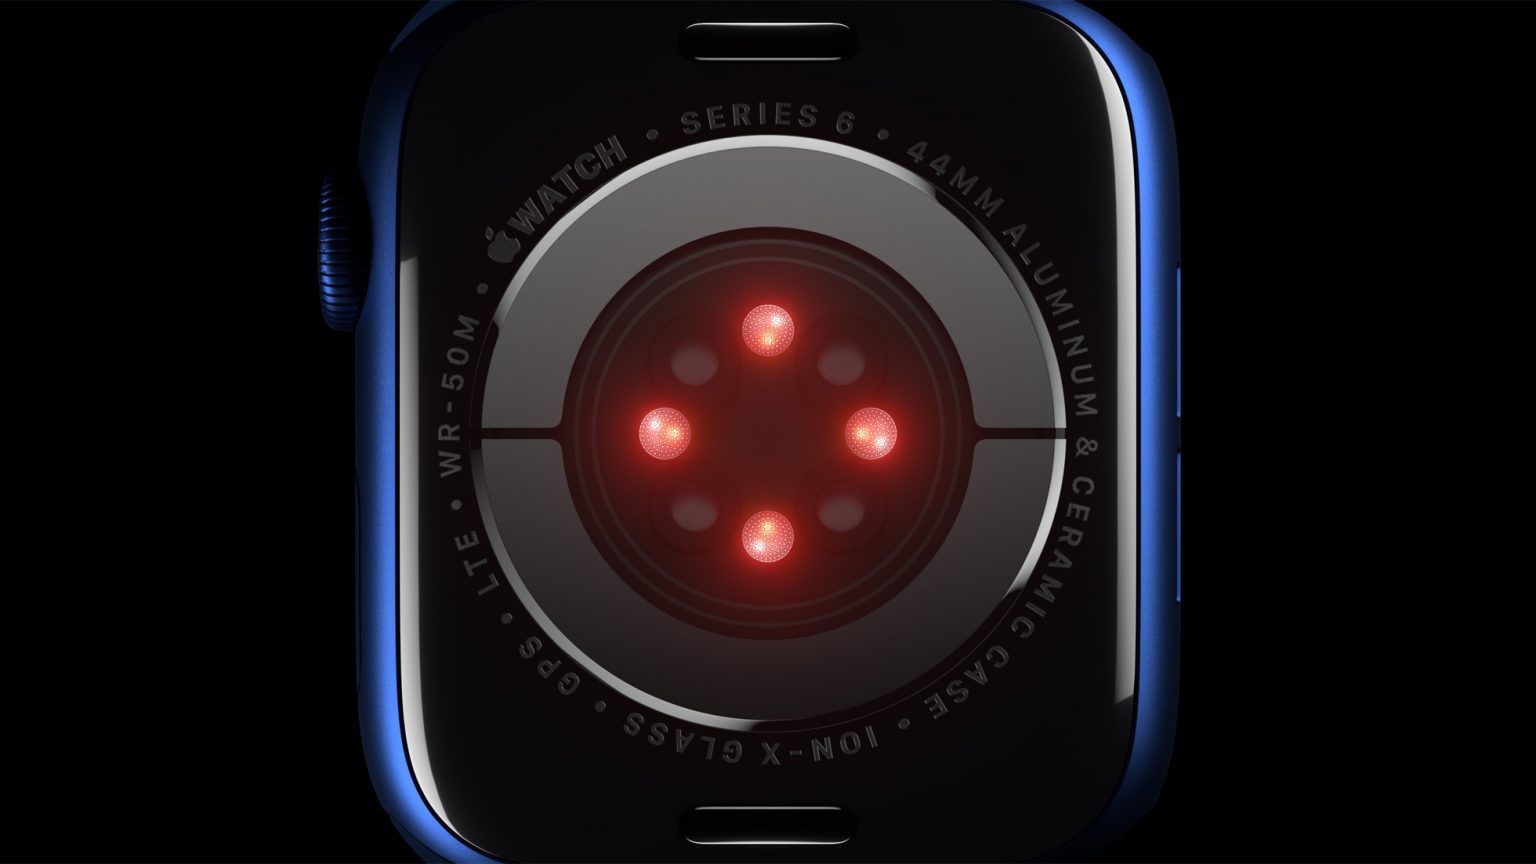 The Blood Oxygen sensor employs LEDs, along with photodiodes on the back crystal of Apple Watch Series 6.